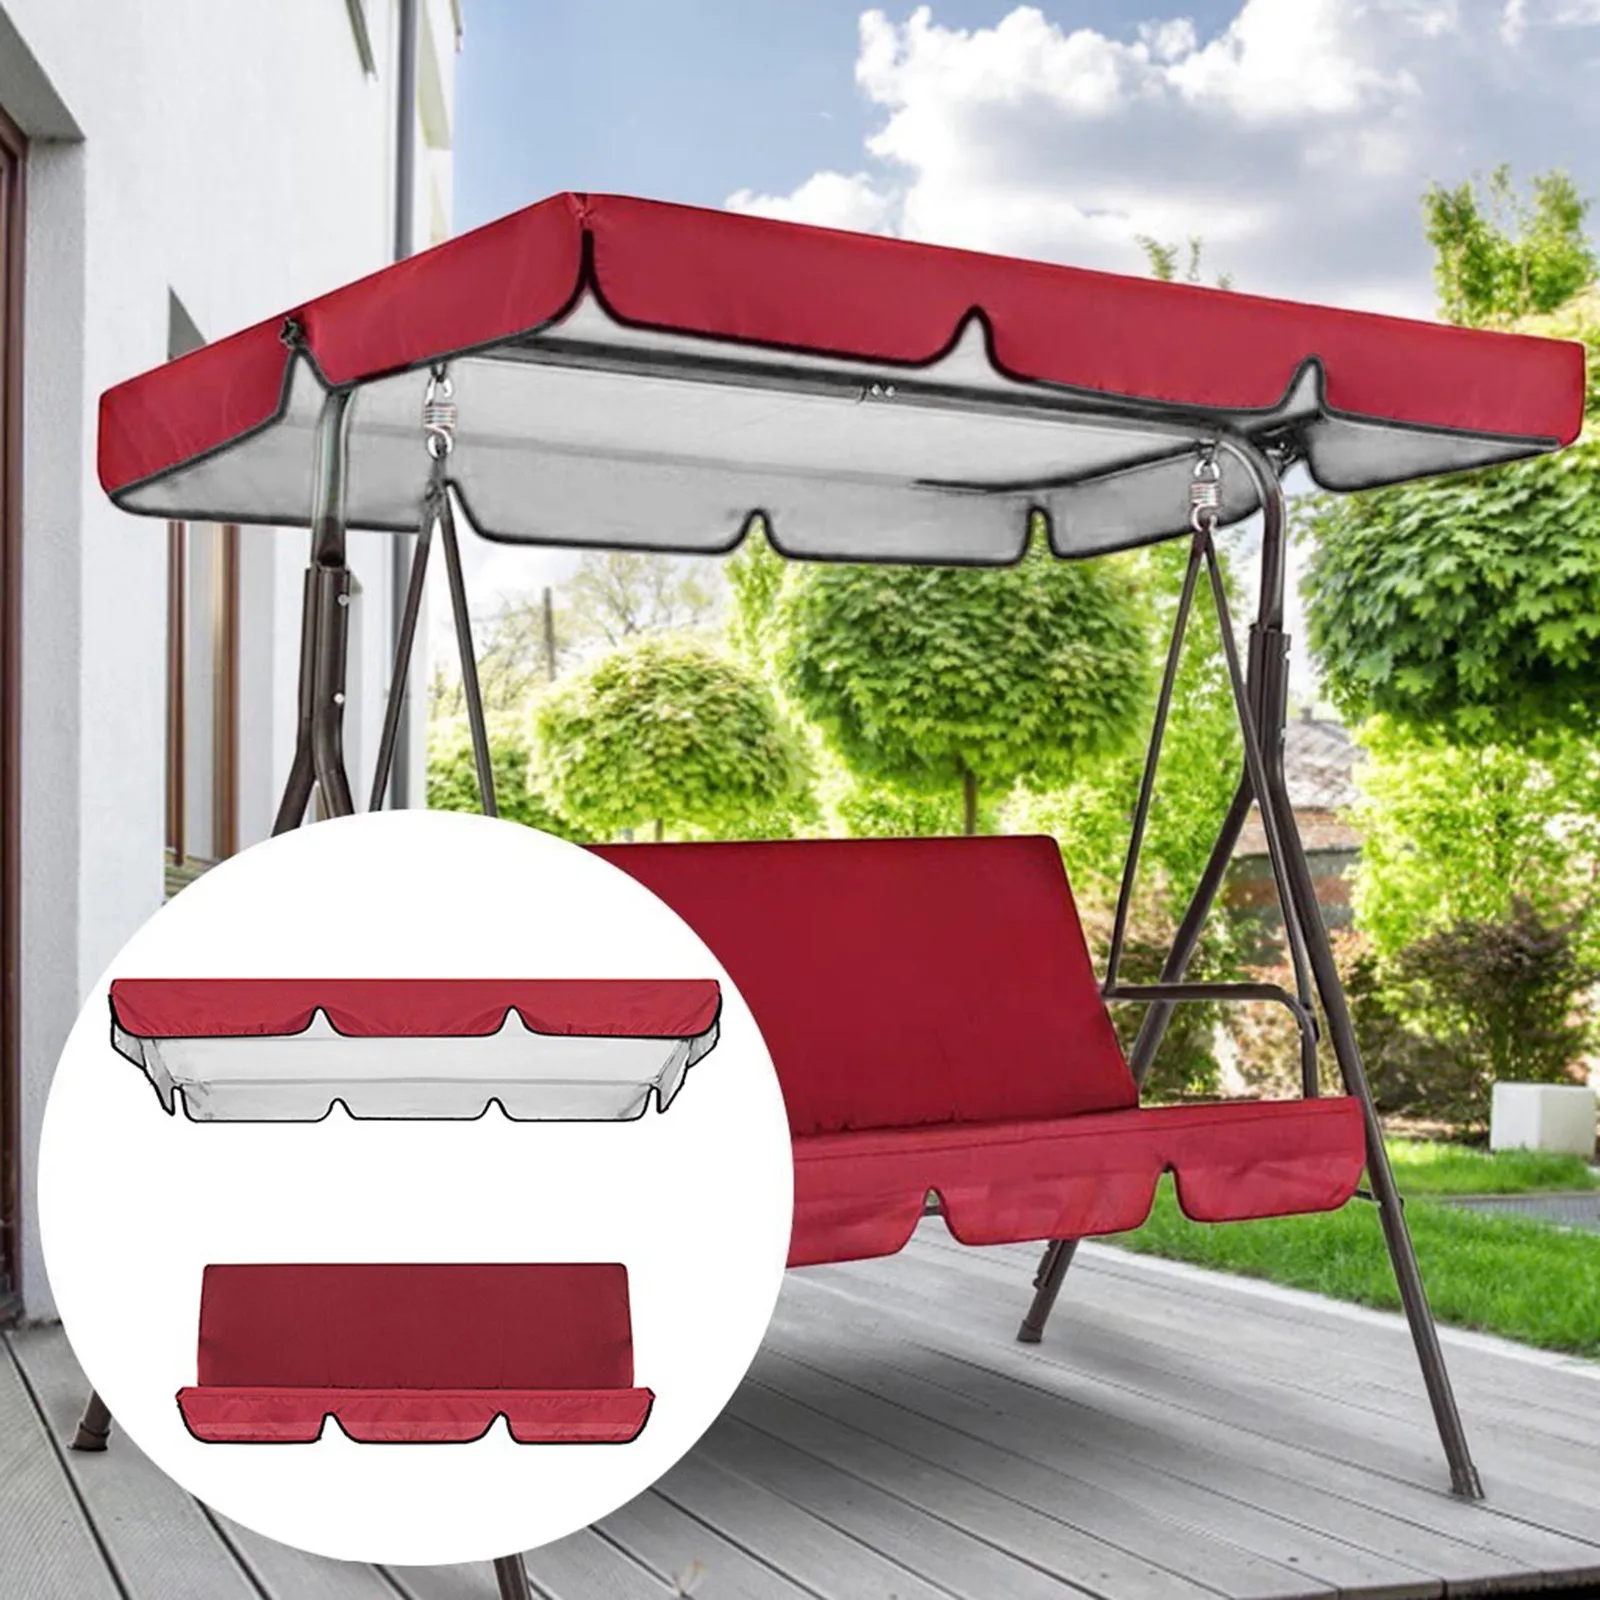 Swing Canopy Cover Waterproof Oxford Cloth Patio Garden Swing Canopy Replacement Top Cover Top Cover for Seat Furniture Chair Outdoor Sunscreen 